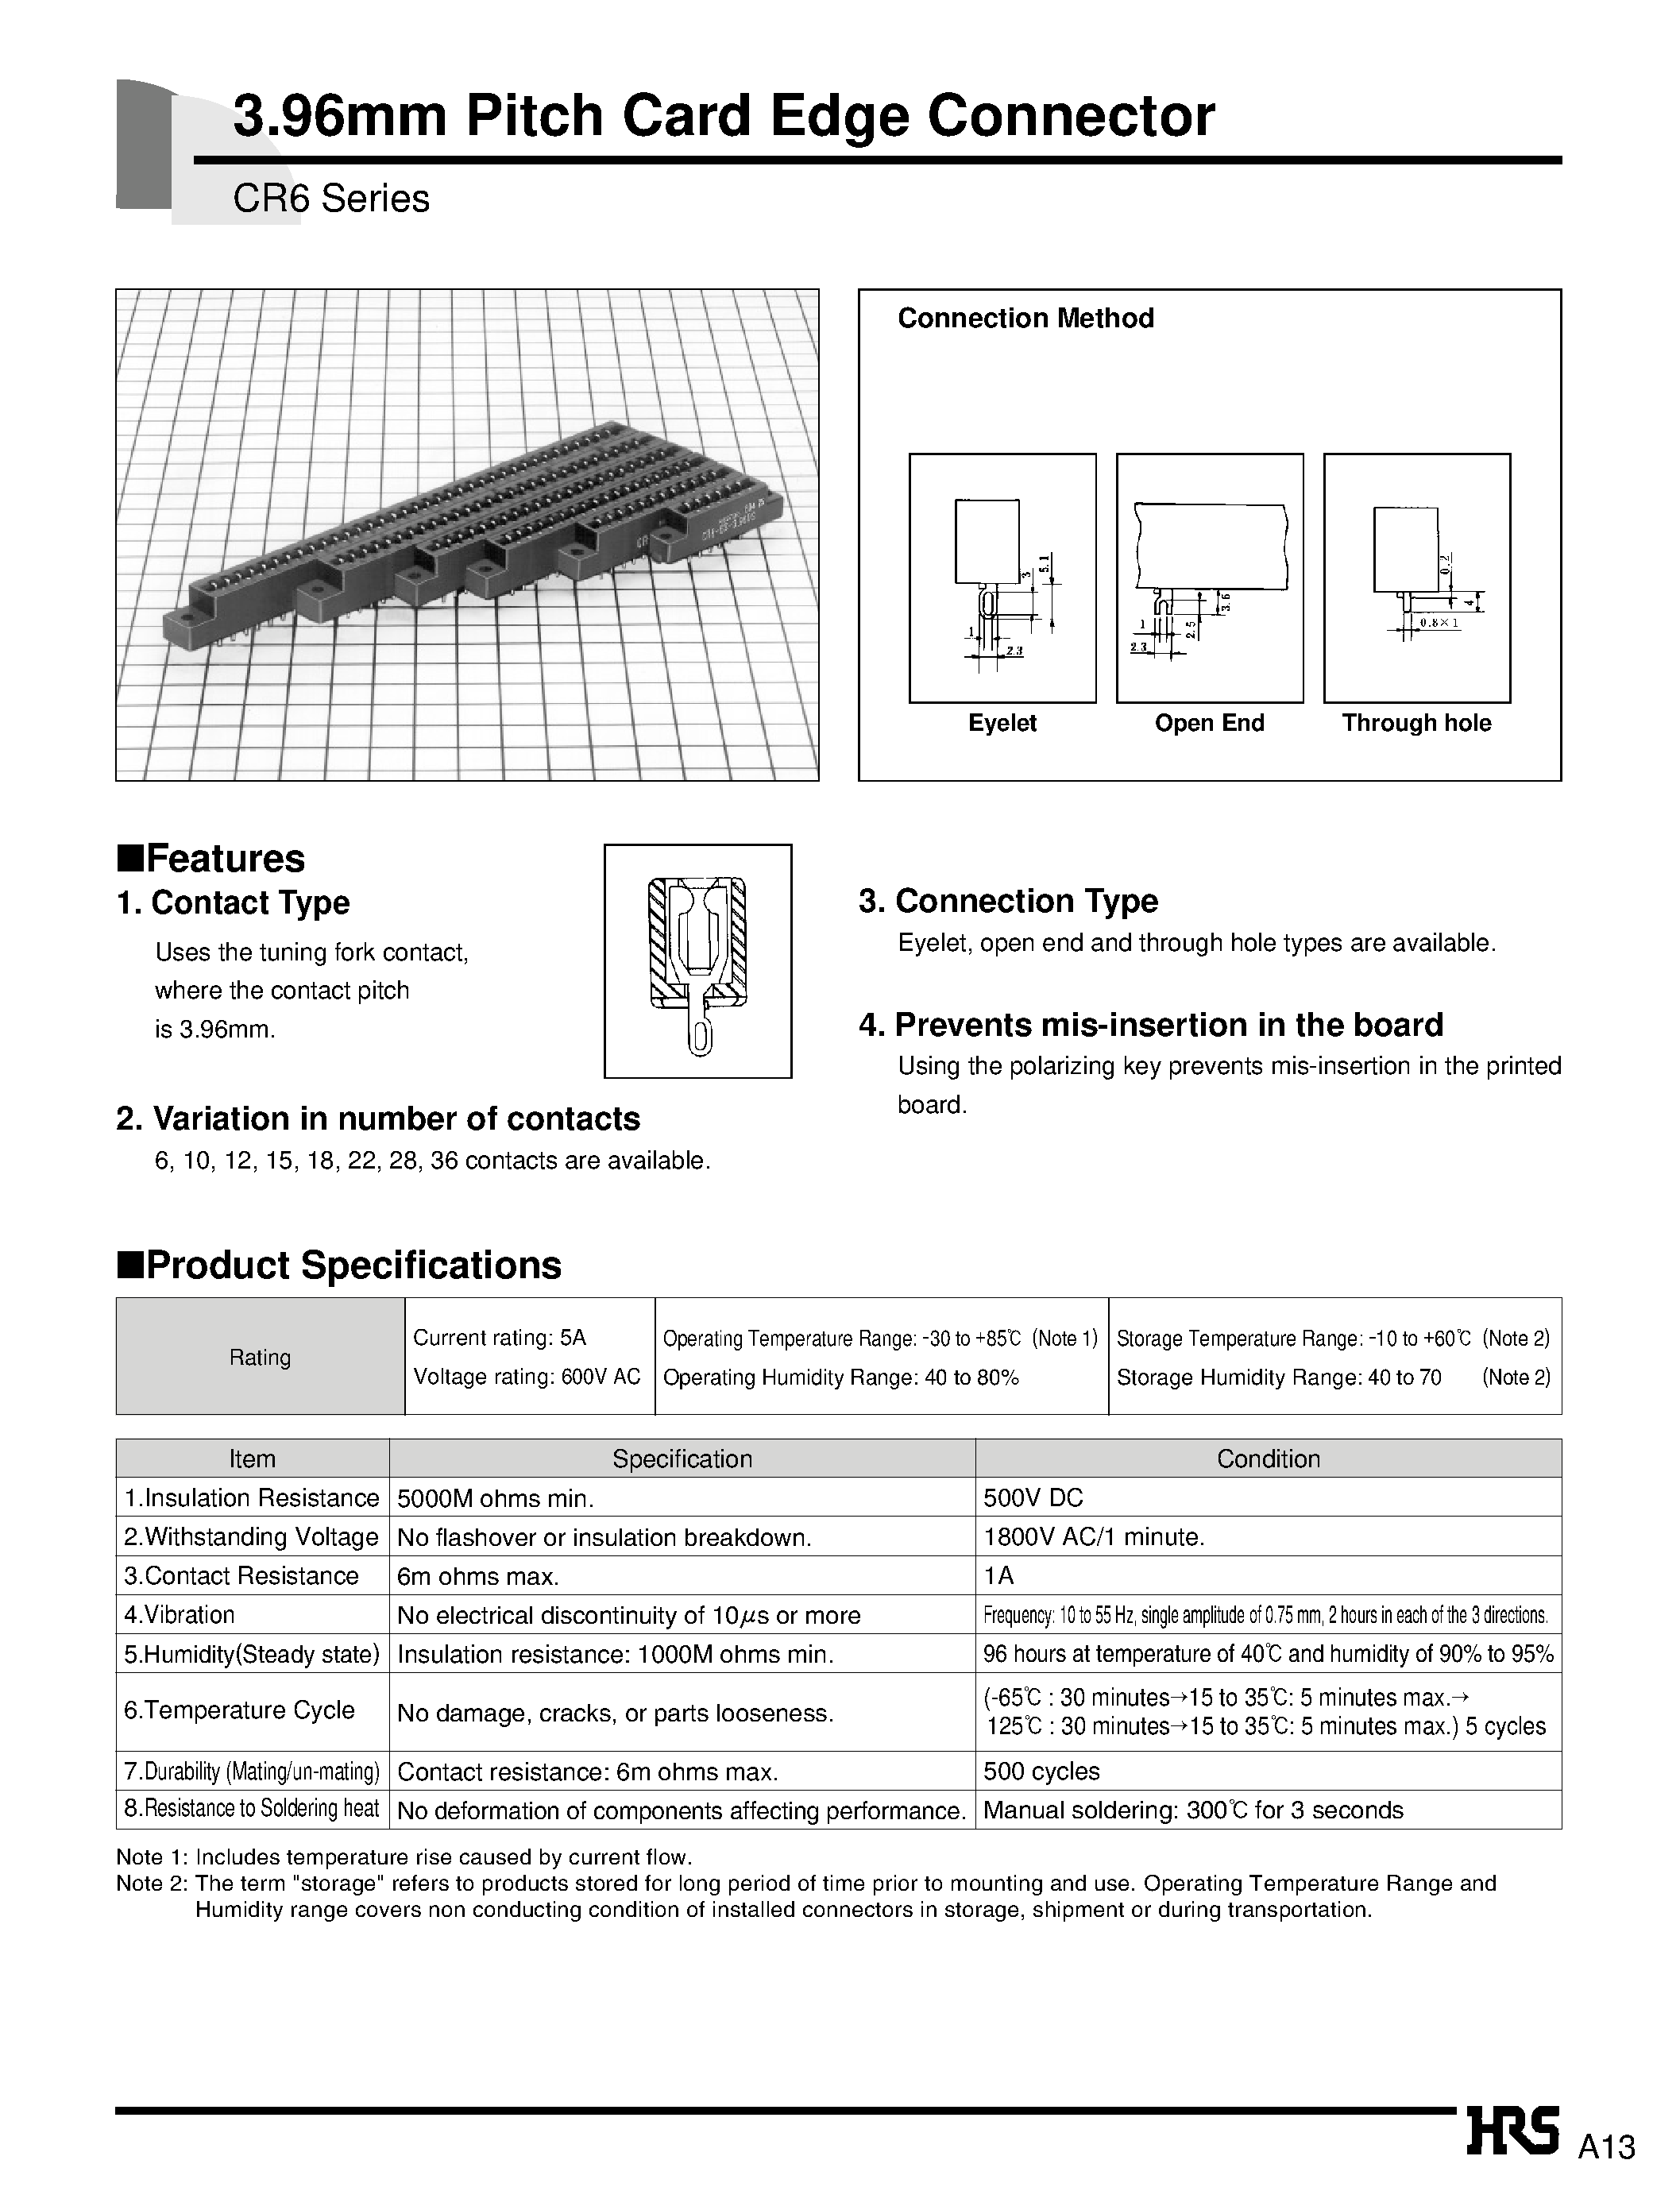 Datasheet CR6-28S-3.96E - 3.96mm Pitch Card Edge Connector page 1